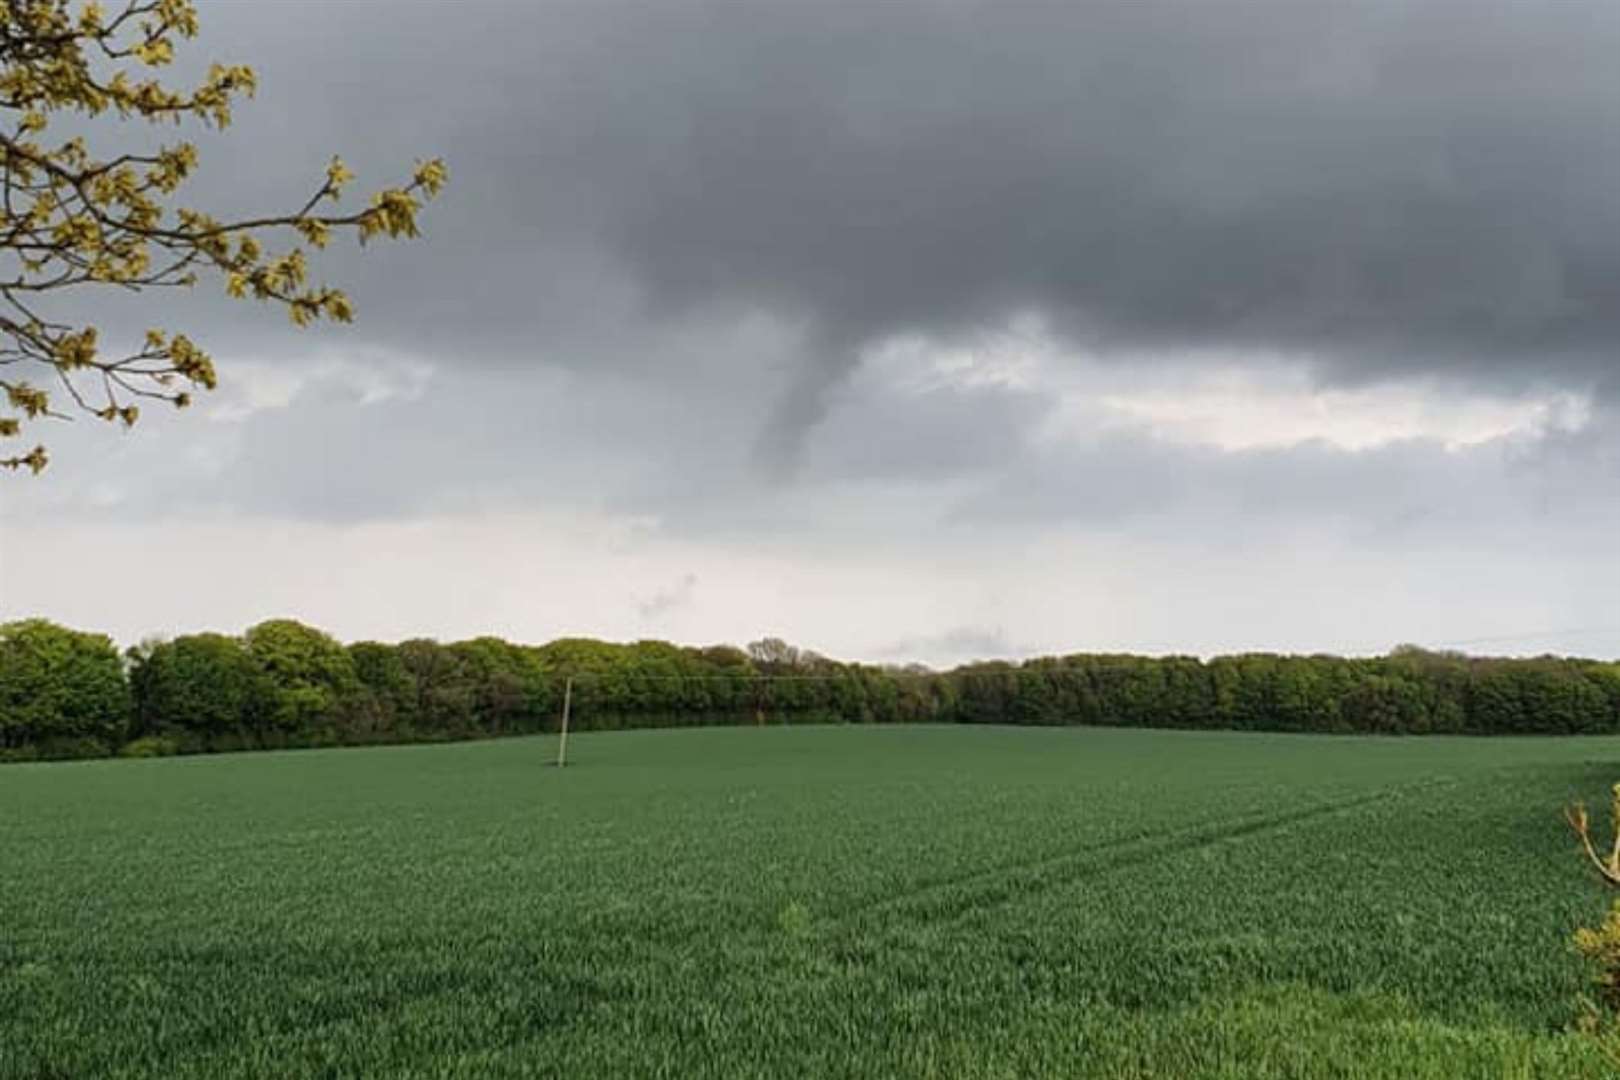 The twister-type funnel cloud was spotted this afternoon. Photo: Naomi Higginson